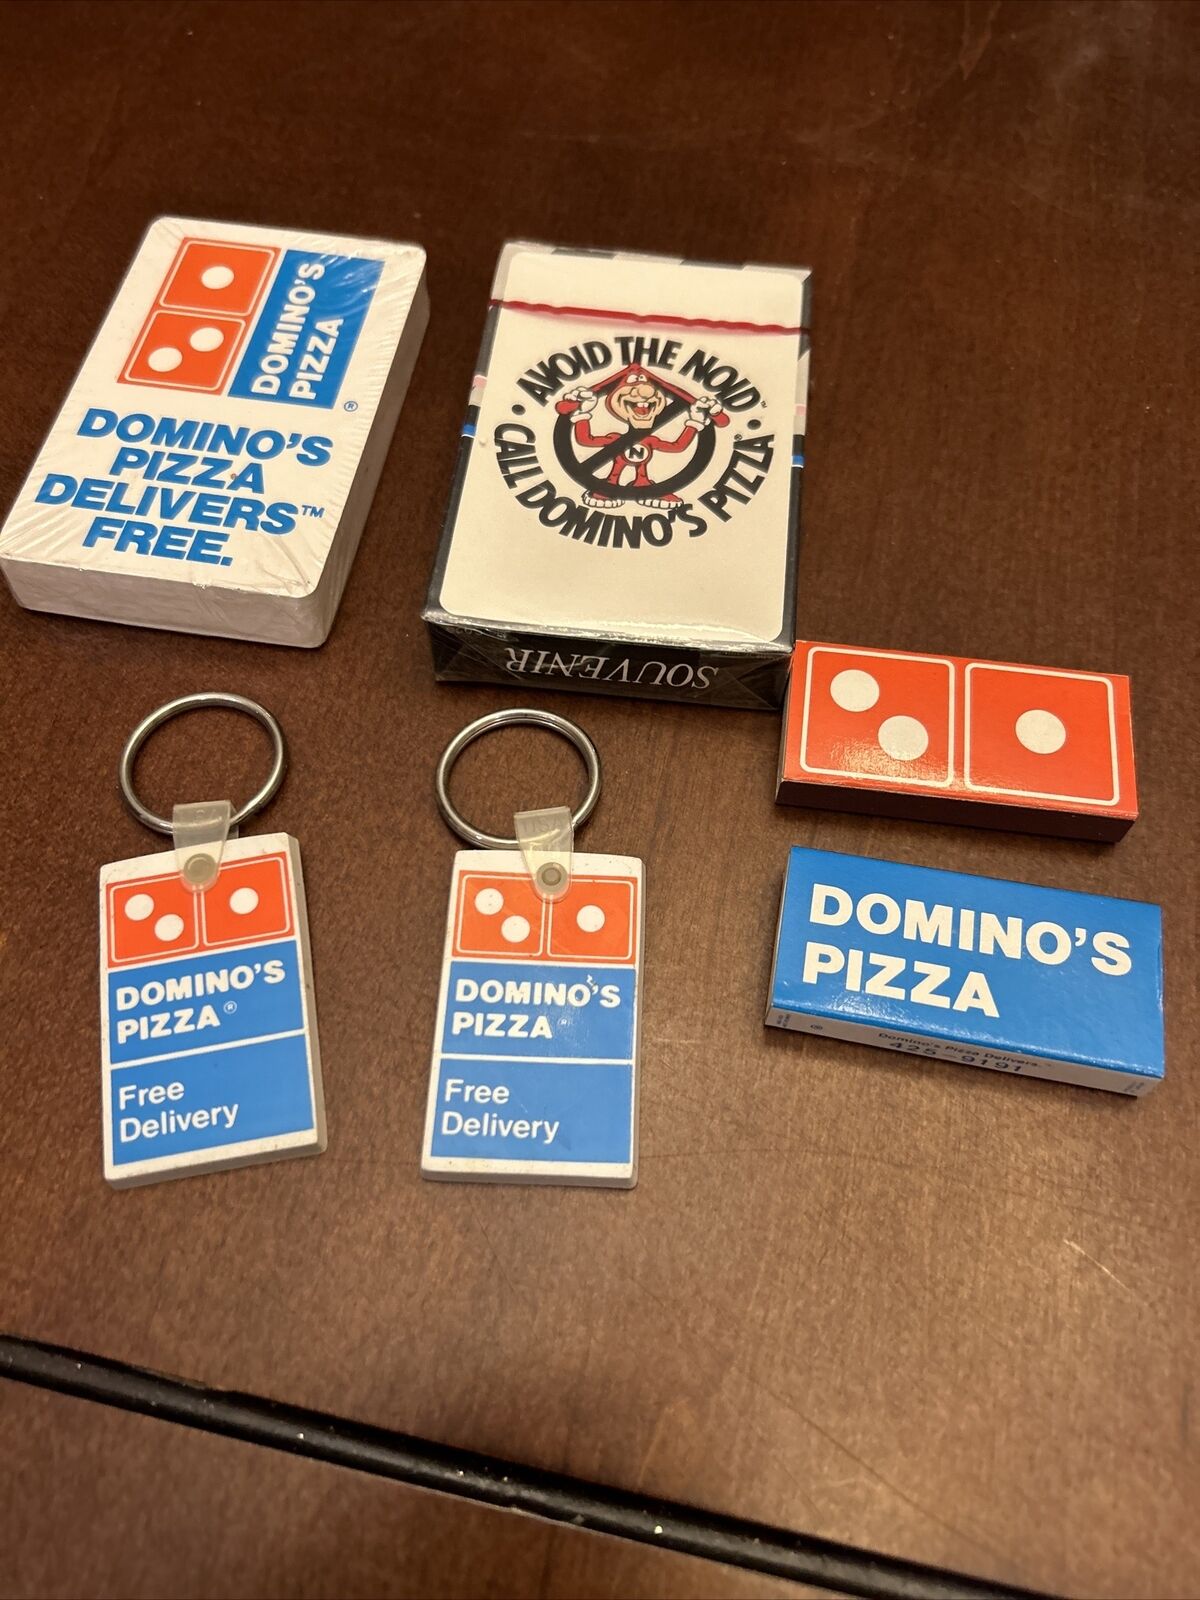 Vintage Domino's Pizza Avoid the Noid Playing Cards Keychains Matches New Old